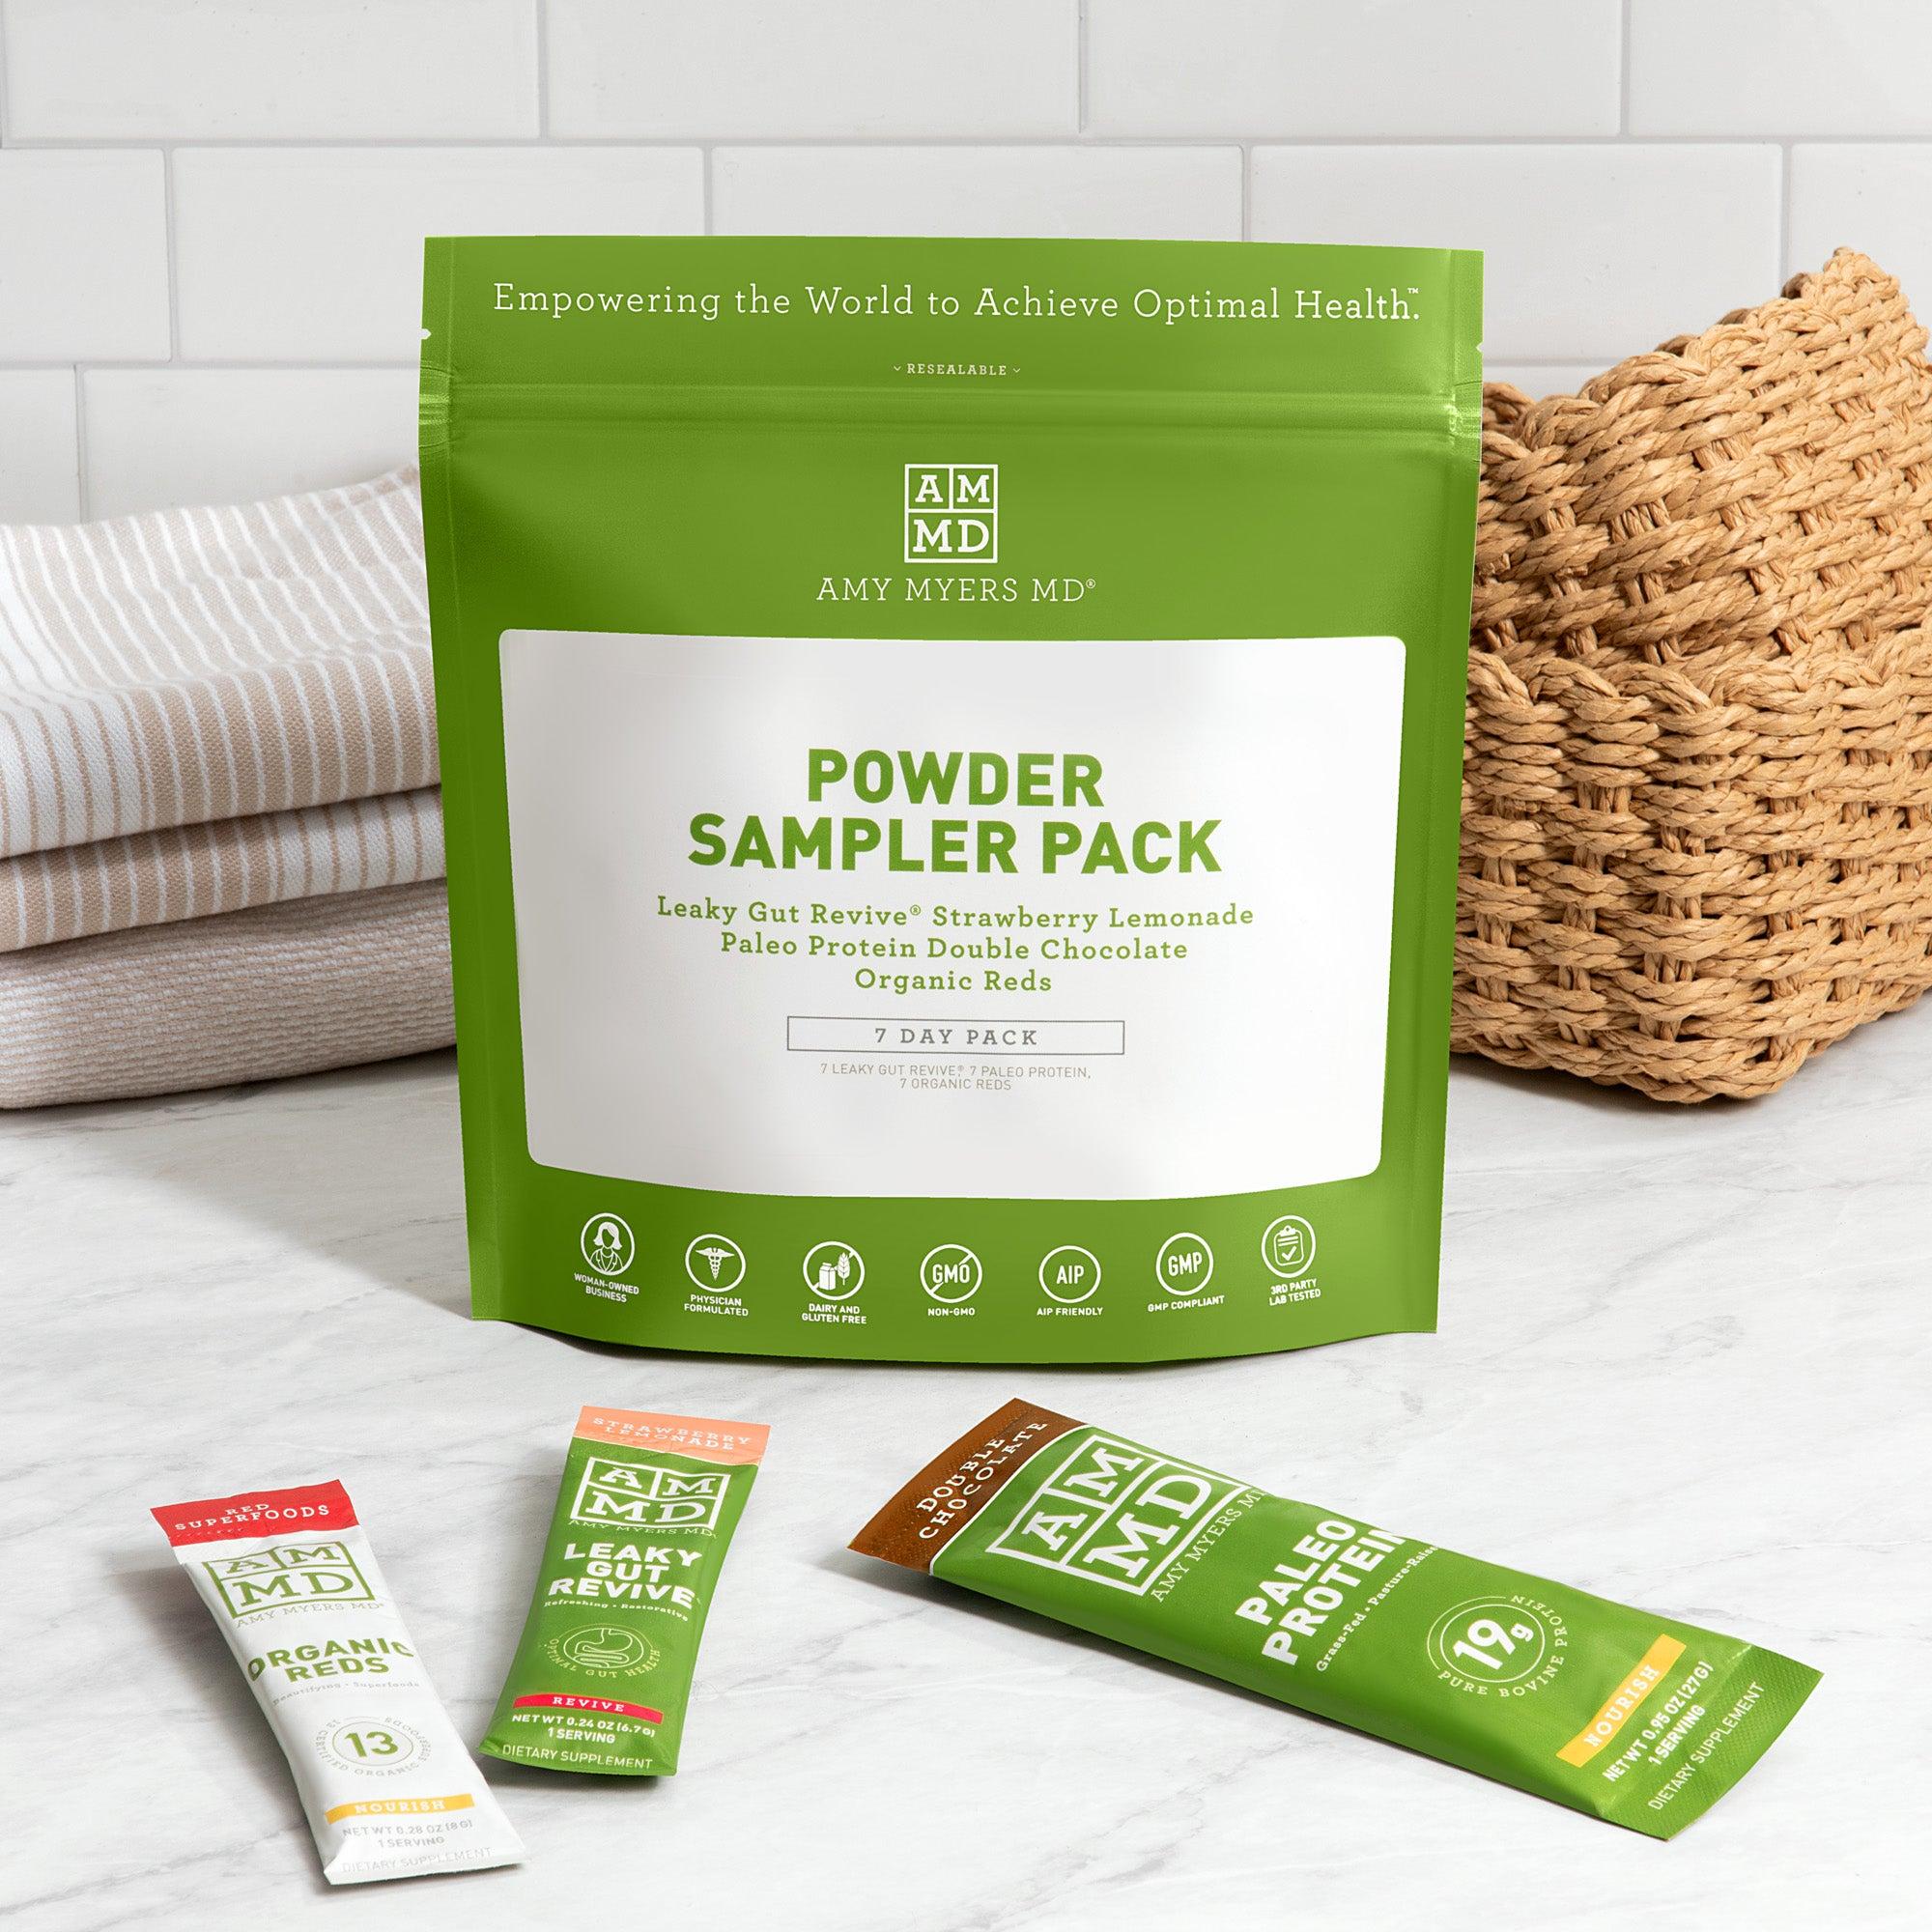 A pouch of Powder Sampler Pack - with single serve packets of Organic Reds, Leaky Gut Revive, Paleo Protein Double Chocolate - Featured Image - Amy Myers MD